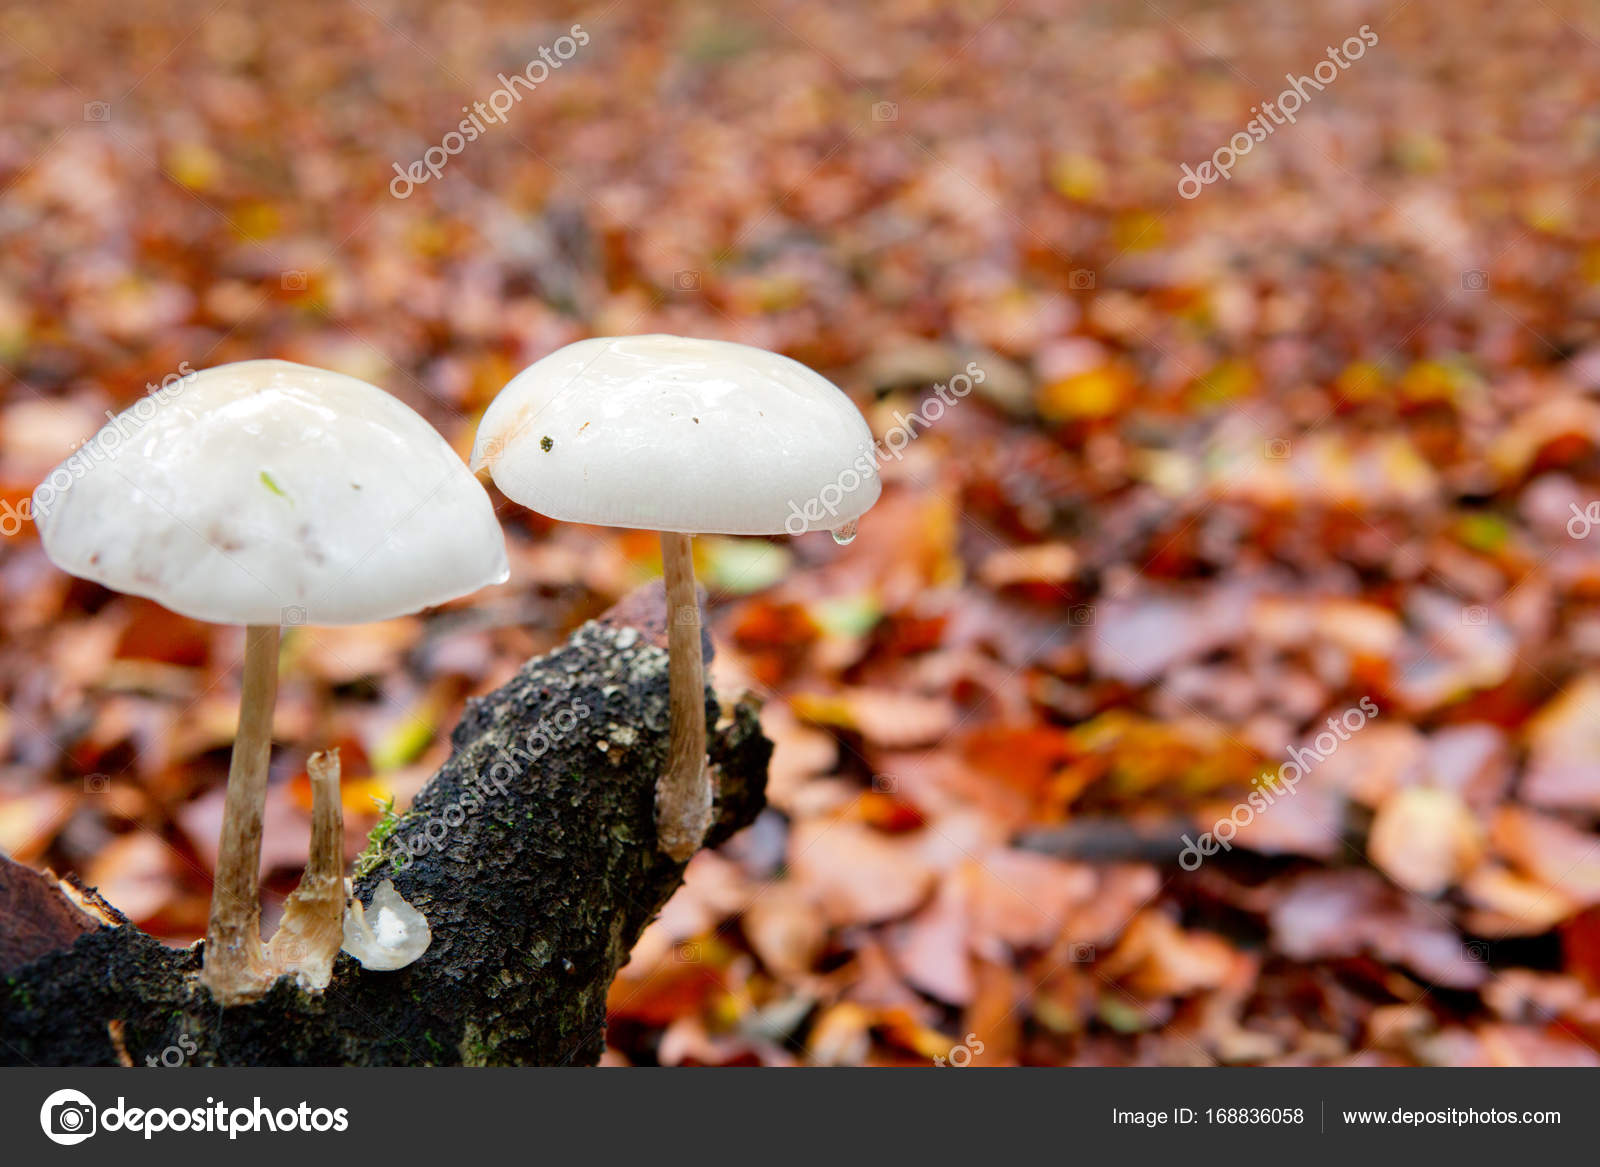 Toxic Mushrooms In The Forest Stock Photo C Swkunst 168836058